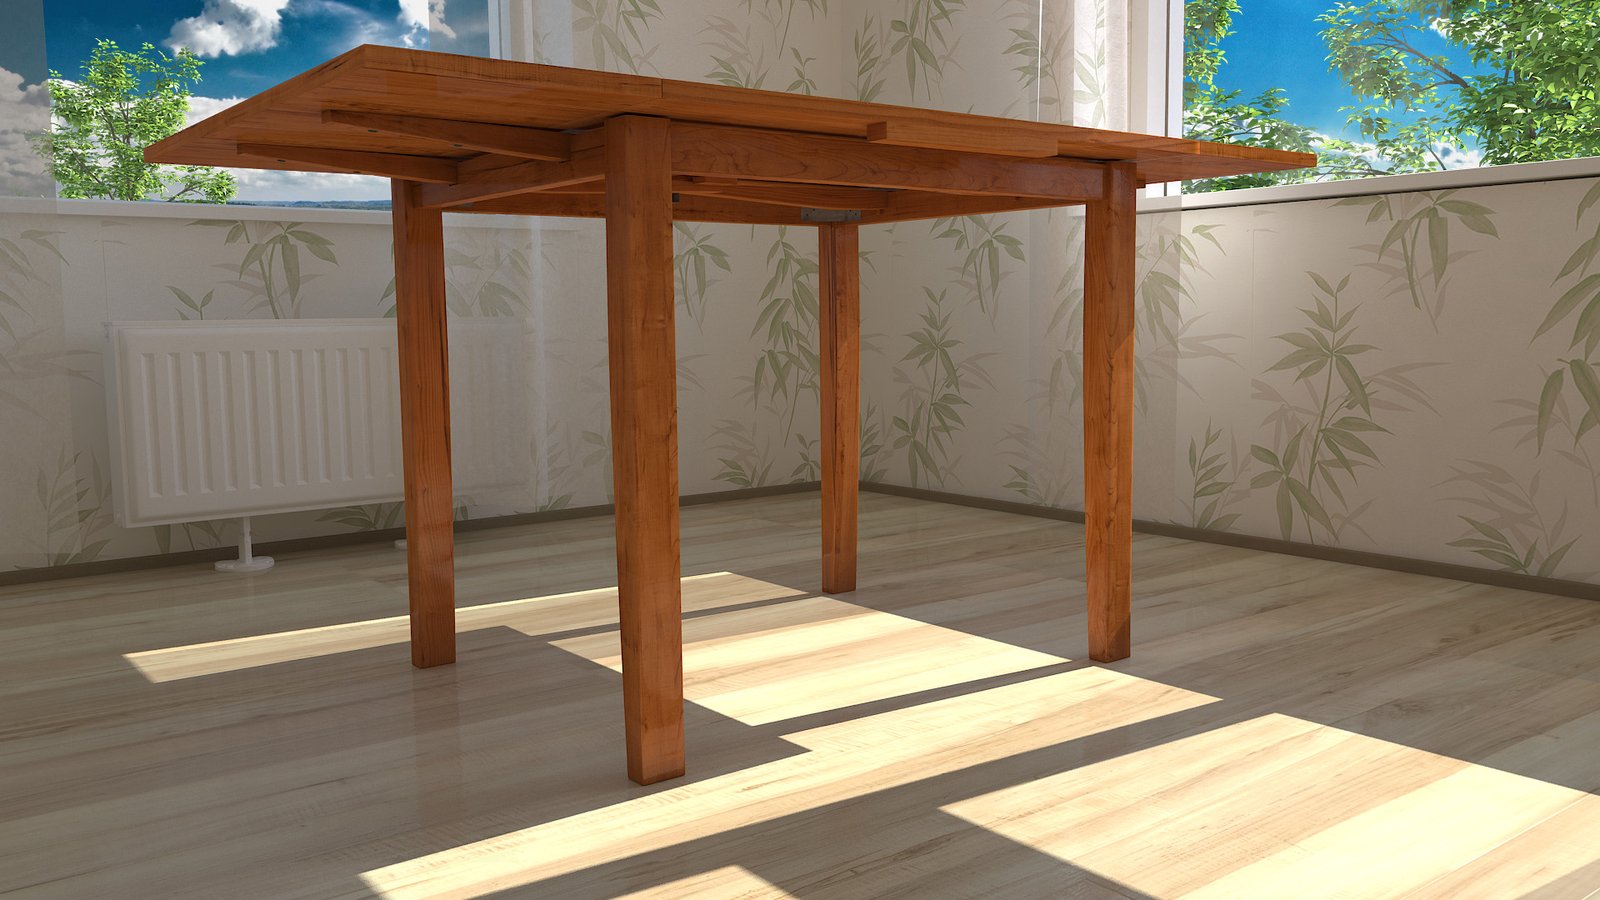 3d rendered table image with realistic vray wood material